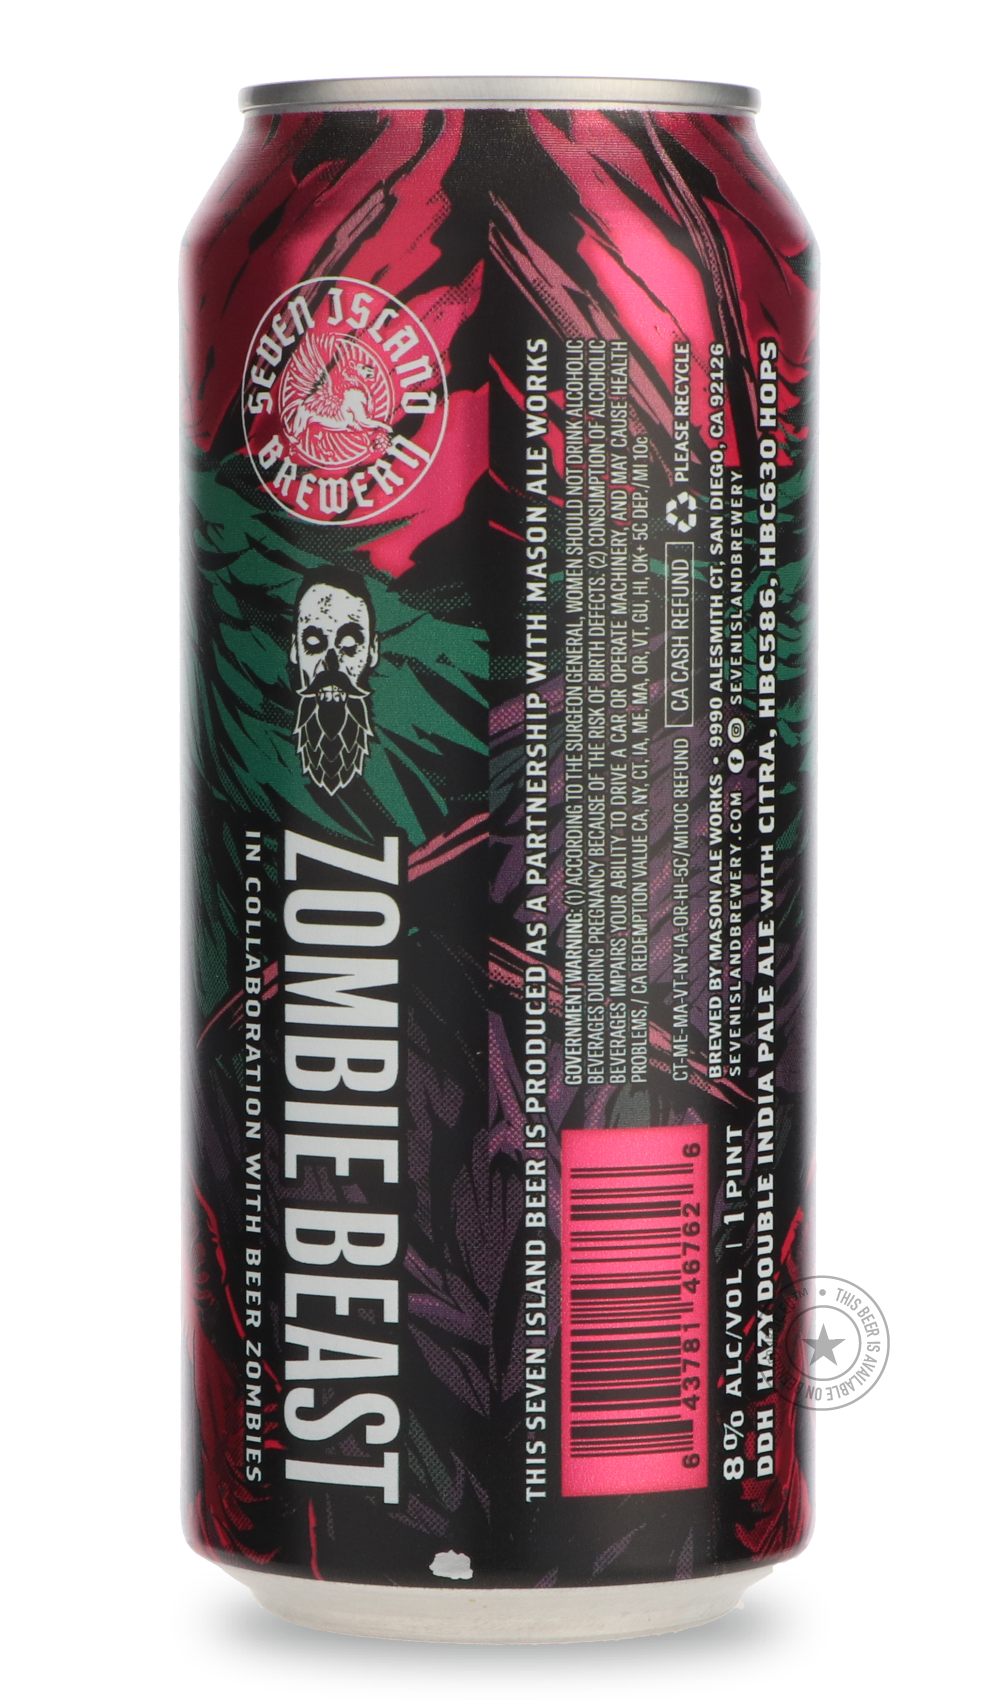 -Beer Zombies- Zombie Beast / Seven Island-IPA- Only @ Beer Republic - The best online beer store for American & Canadian craft beer - Buy beer online from the USA and Canada - Bier online kopen - Amerikaans bier kopen - Craft beer store - Craft beer kopen - Amerikanisch bier kaufen - Bier online kaufen - Acheter biere online - IPA - Stout - Porter - New England IPA - Hazy IPA - Imperial Stout - Barrel Aged - Barrel Aged Imperial Stout - Brown - Dark beer - Blond - Blonde - Pilsner - Lager - Wheat - Weizen 